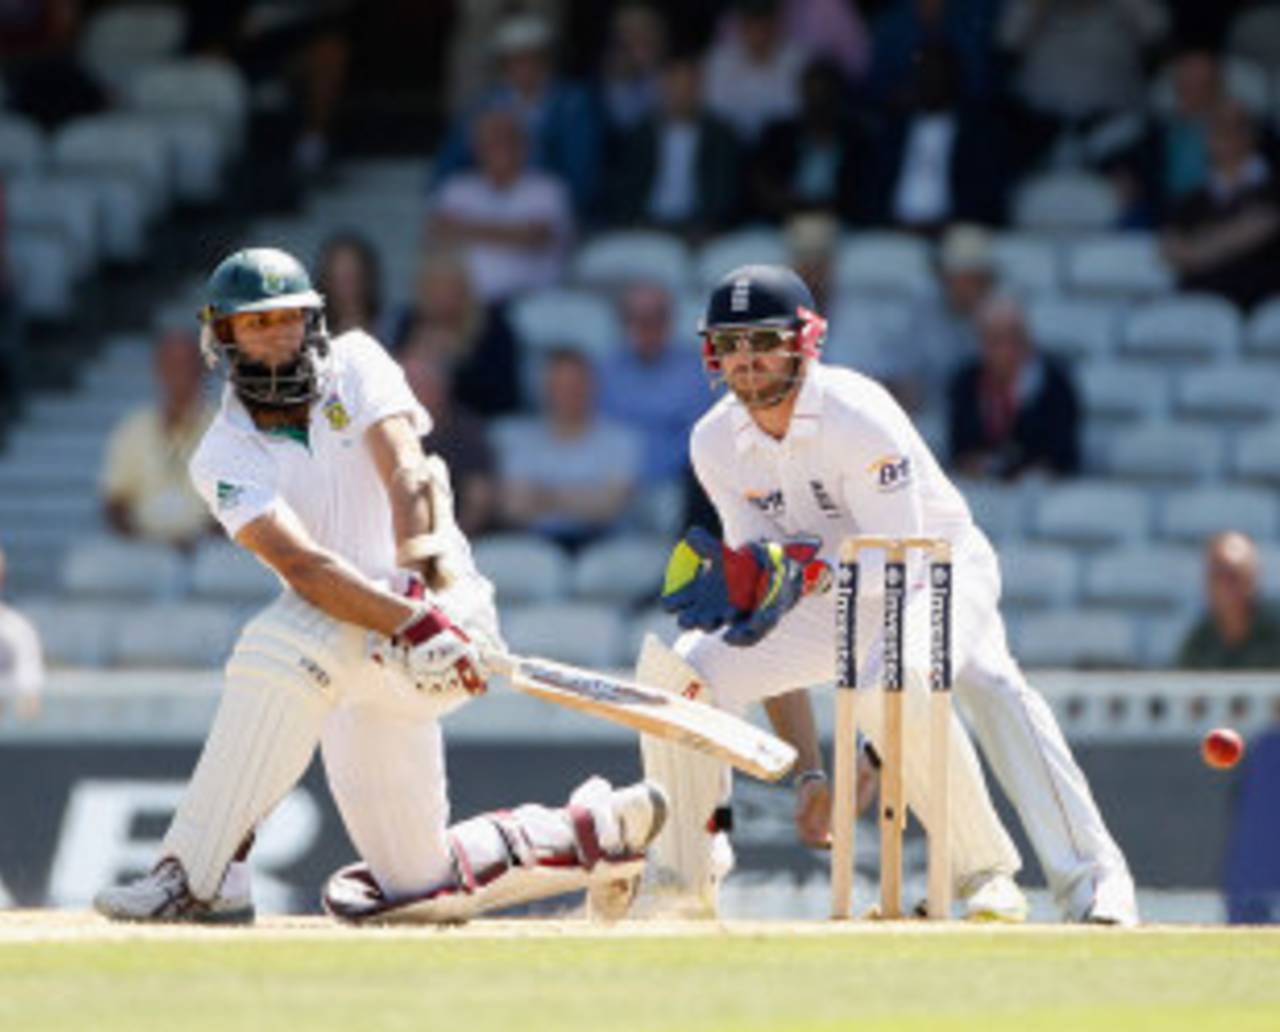 Hashim Amla sweeps during his record-breaking innings, England v South Africa, 1st Investec Test, The Oval, 4th day, July, 22, 2012